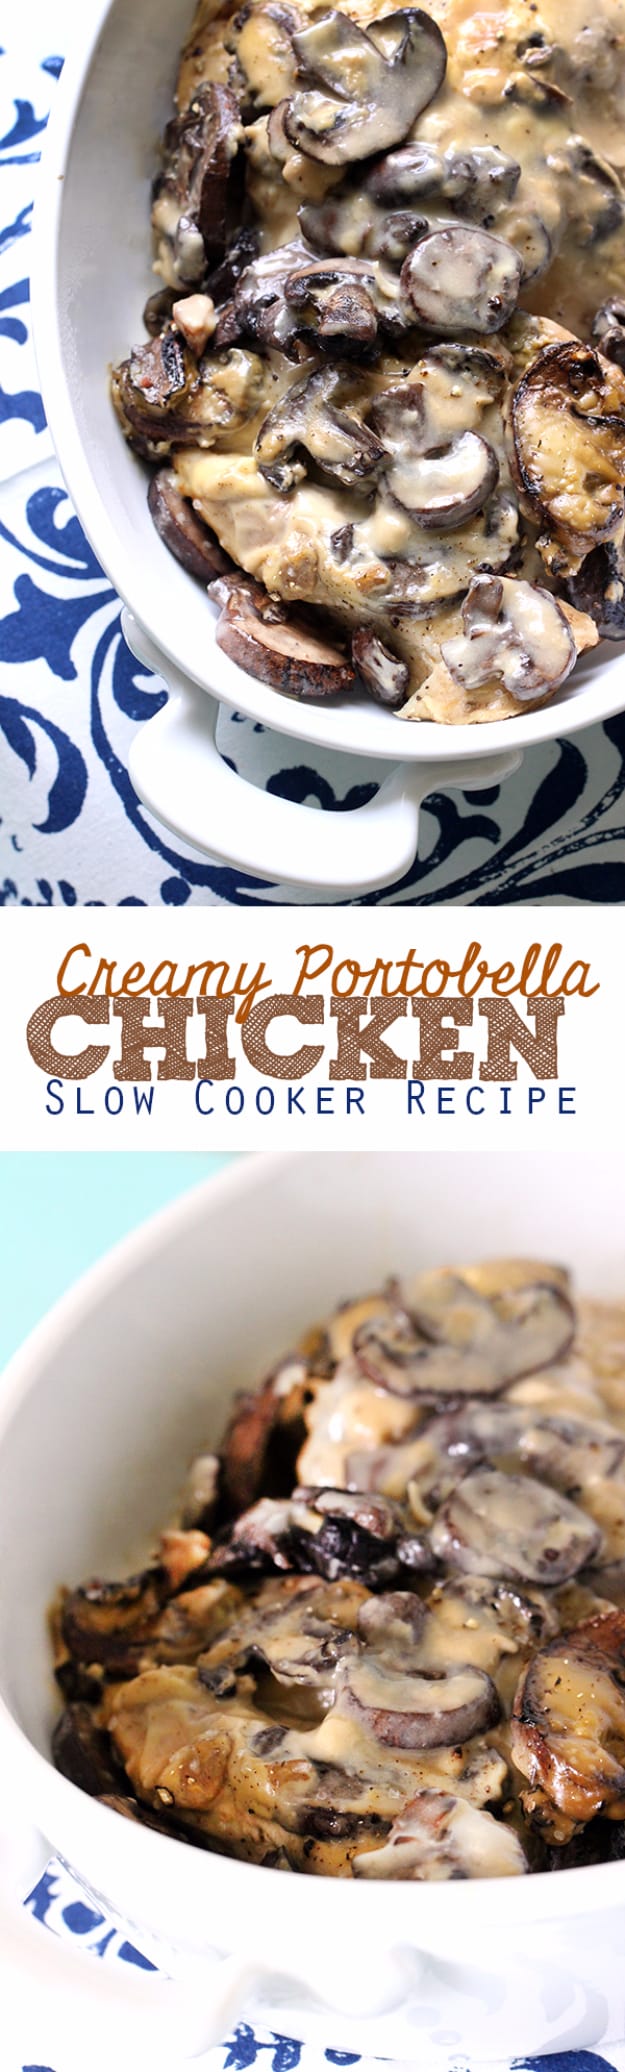 33 Easy Three Ingredient Recipes - 3 Ingredient Portobella Mushroom Chicken - Quick And Healthy 3 Ingredients Recipe Ideas for Breakfast, Lunch, Dinner, Appetizers, Snacks and Desserts - Cookies, Chicken, Crockpot Ideas, Baking and Microwave Recipes and Tutorials #easyrecipes #quickrecipes